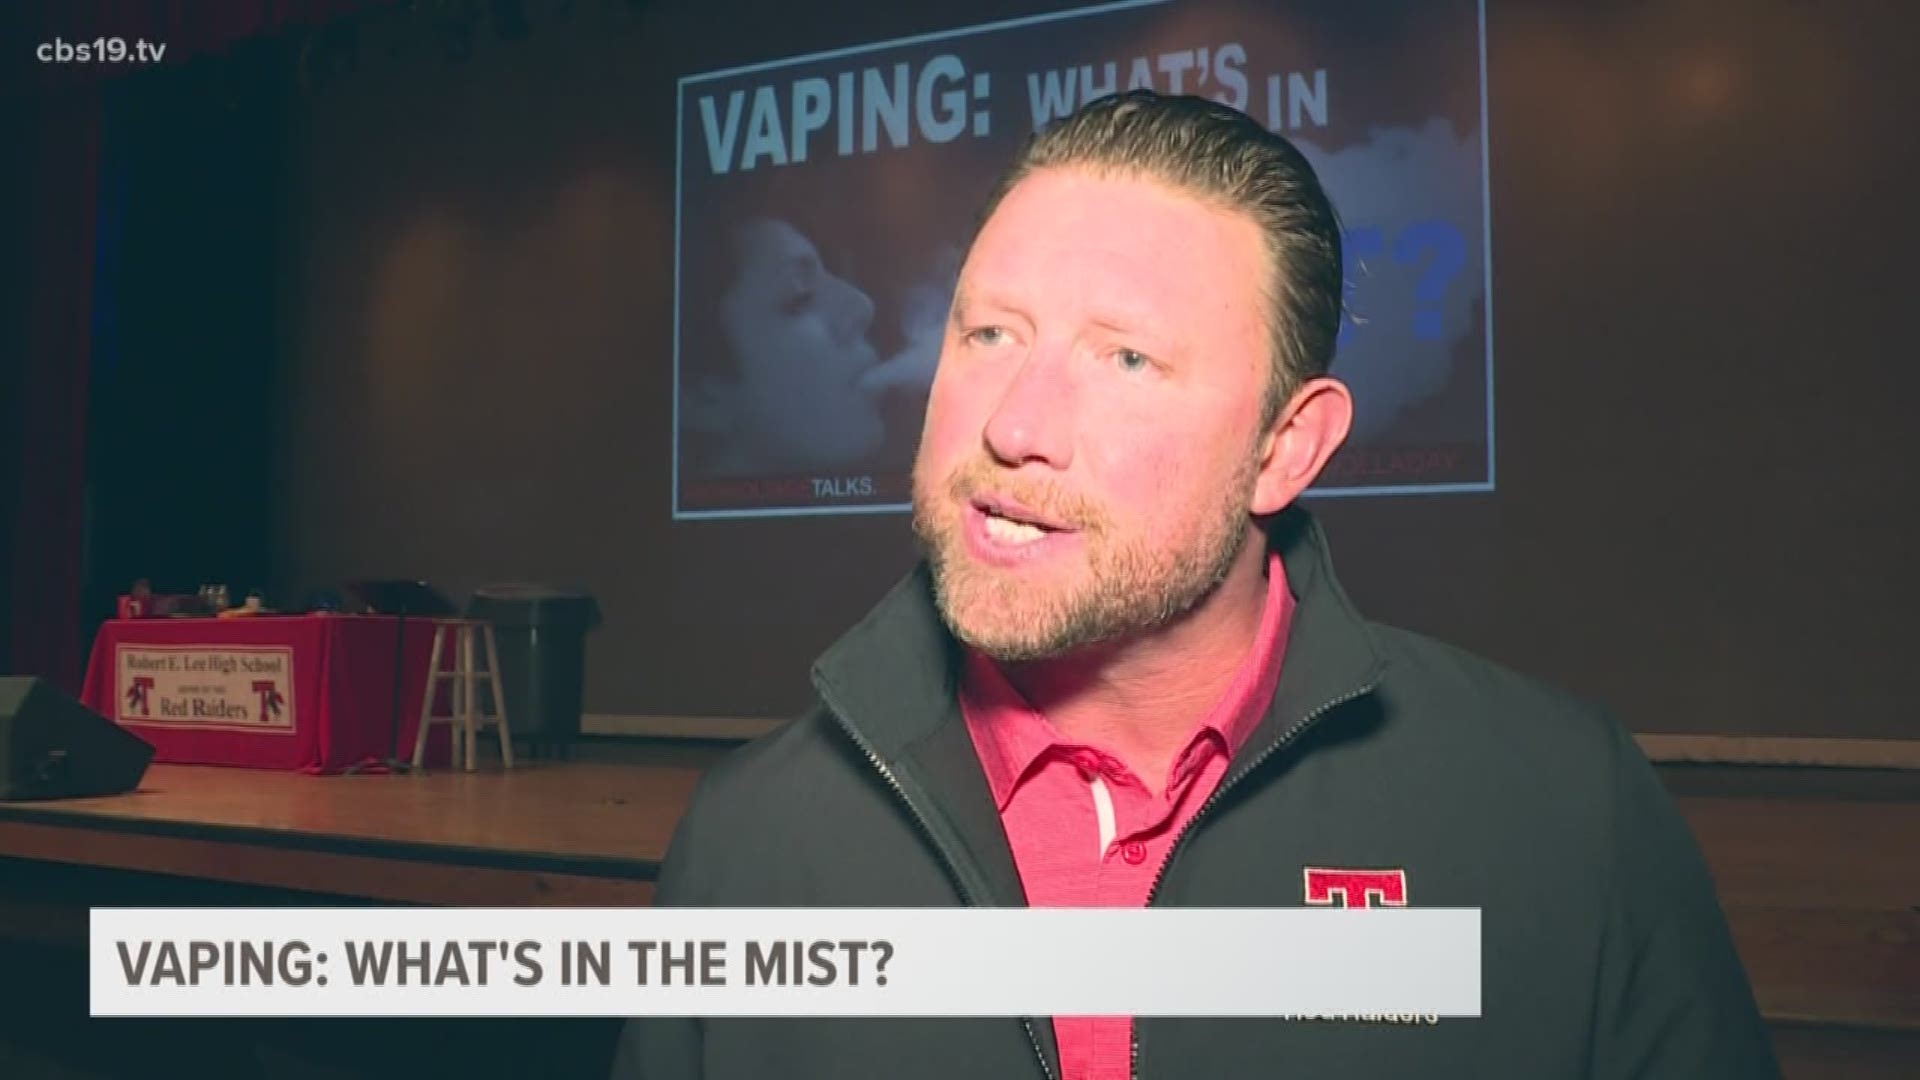 Robert E. Lee students and parents heard a presentation about "Vaping: What's in the Mist."